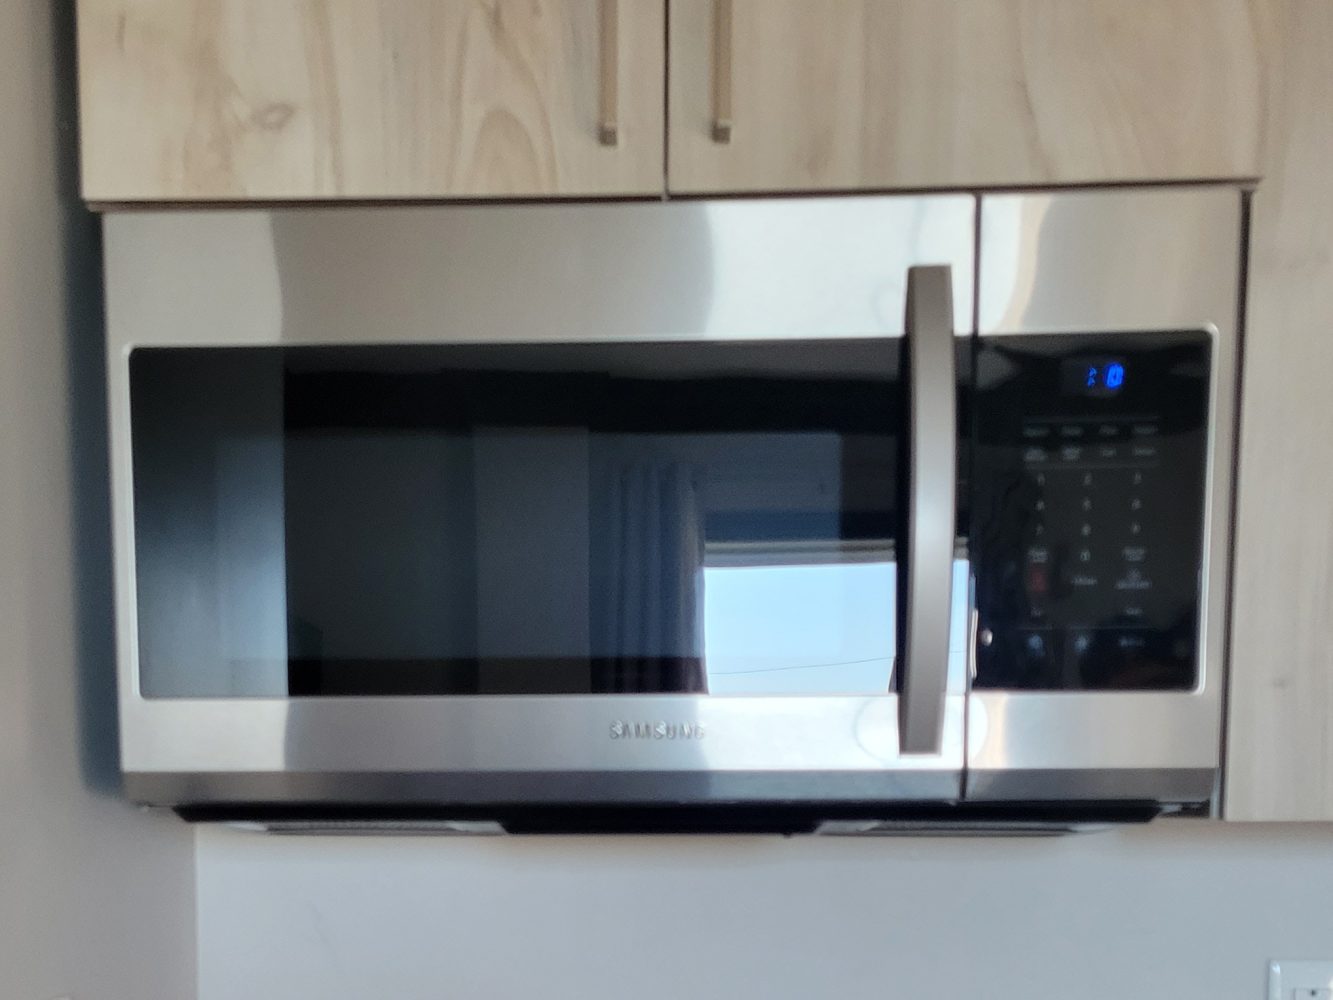 • Samsung Stainless Steel Over the Range Microwave